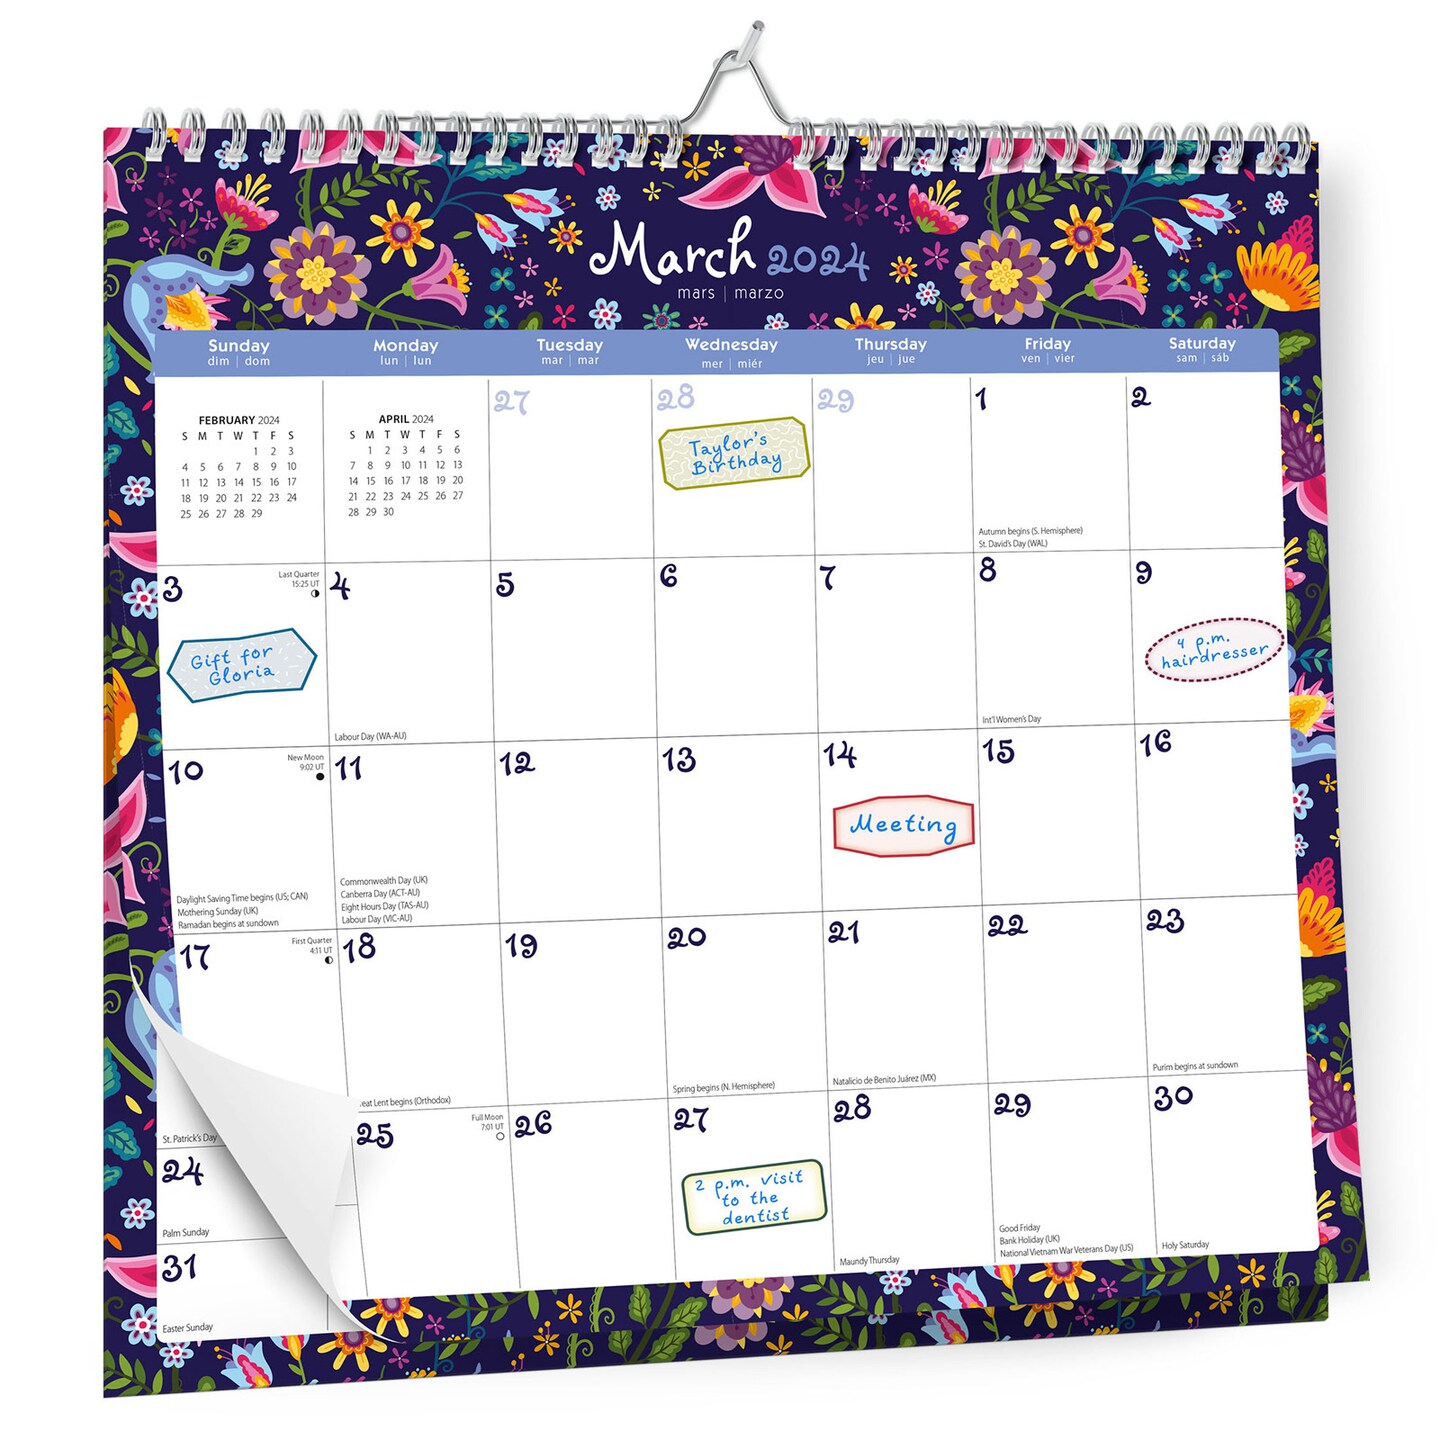 Floral Splendor | 2024 12 x 12 Inch 18 Months Monthly Square Wire-O Calendar | Sticker Sheet | July 2023 - December 2024 | StarGifts | Stationery Planning